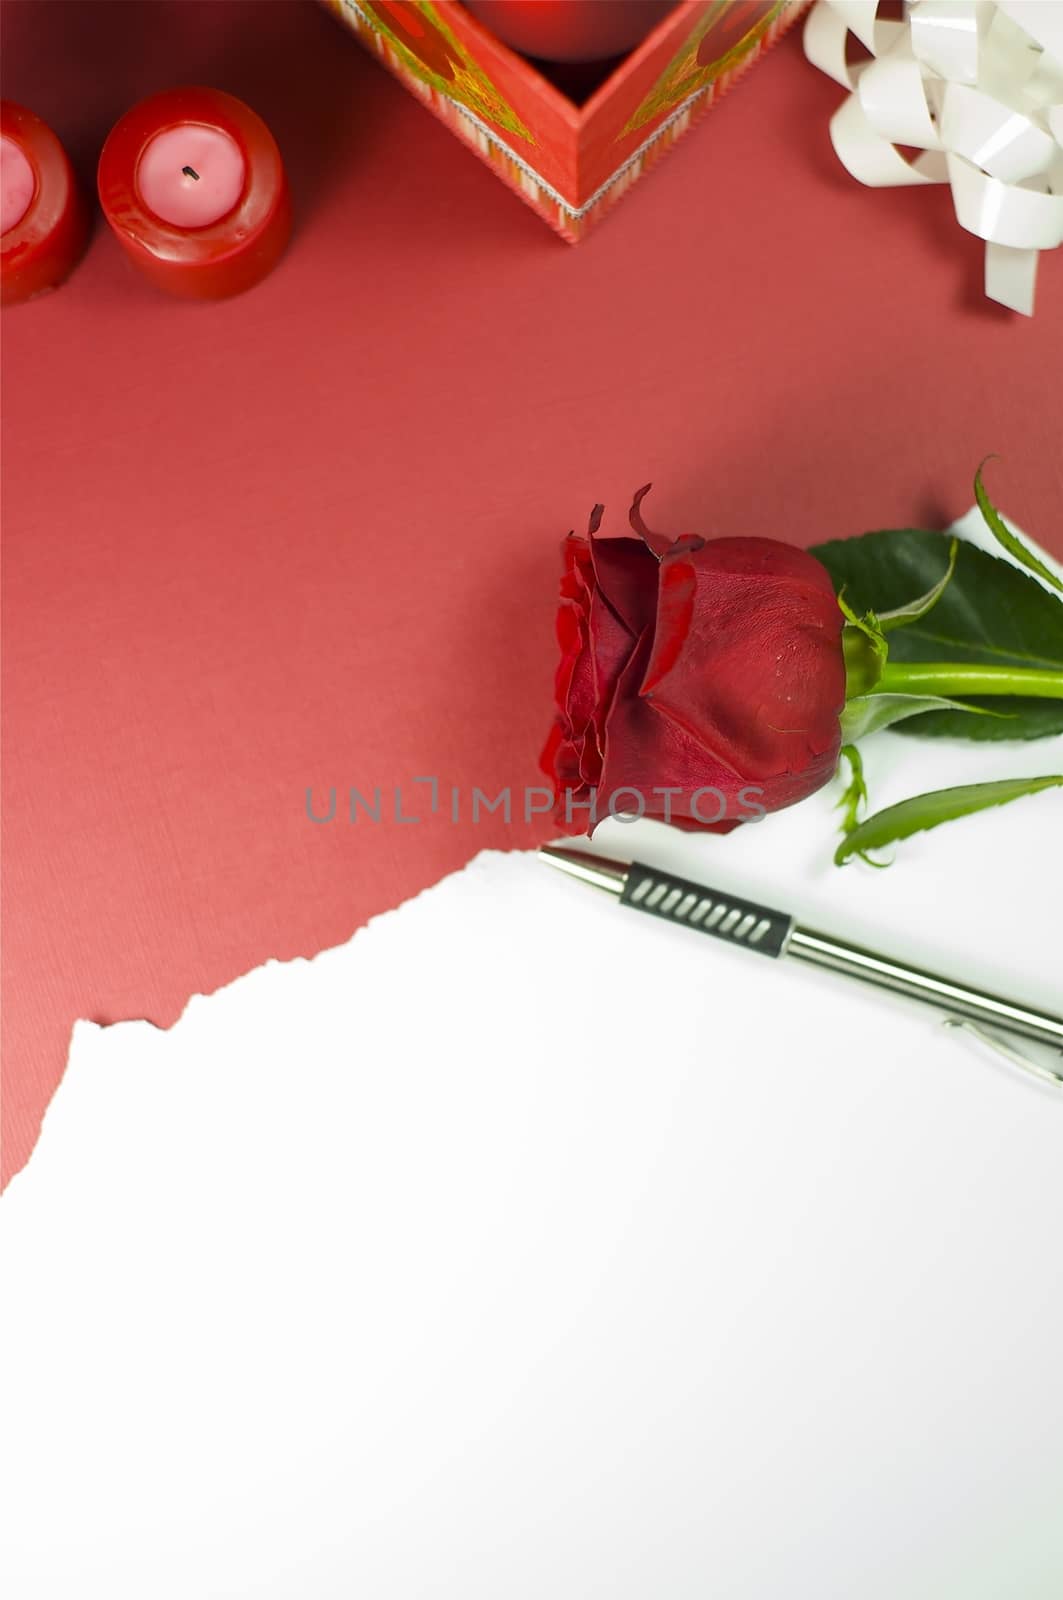 Red Rose Message. Red Rose Flower, White Paper and Red Candles. Great Copy Space for Special Occasions.